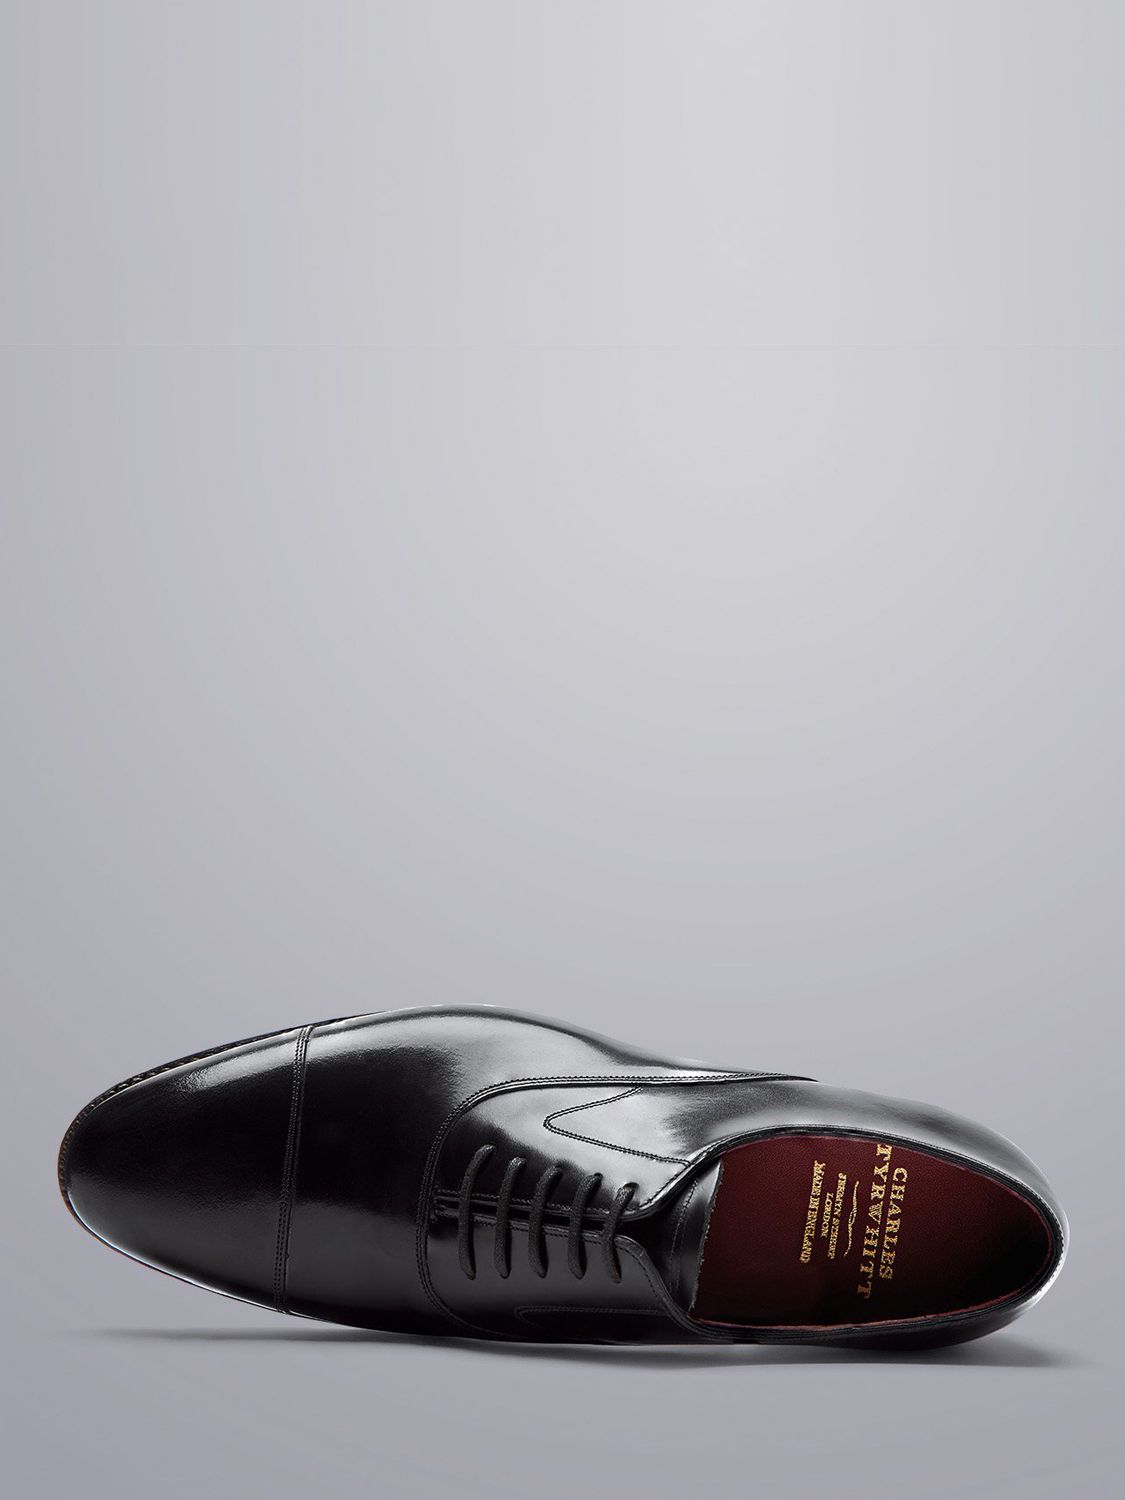 Buy Charles Tyrwhitt High Shine Leather Oxford Shoes, Black Online at johnlewis.com